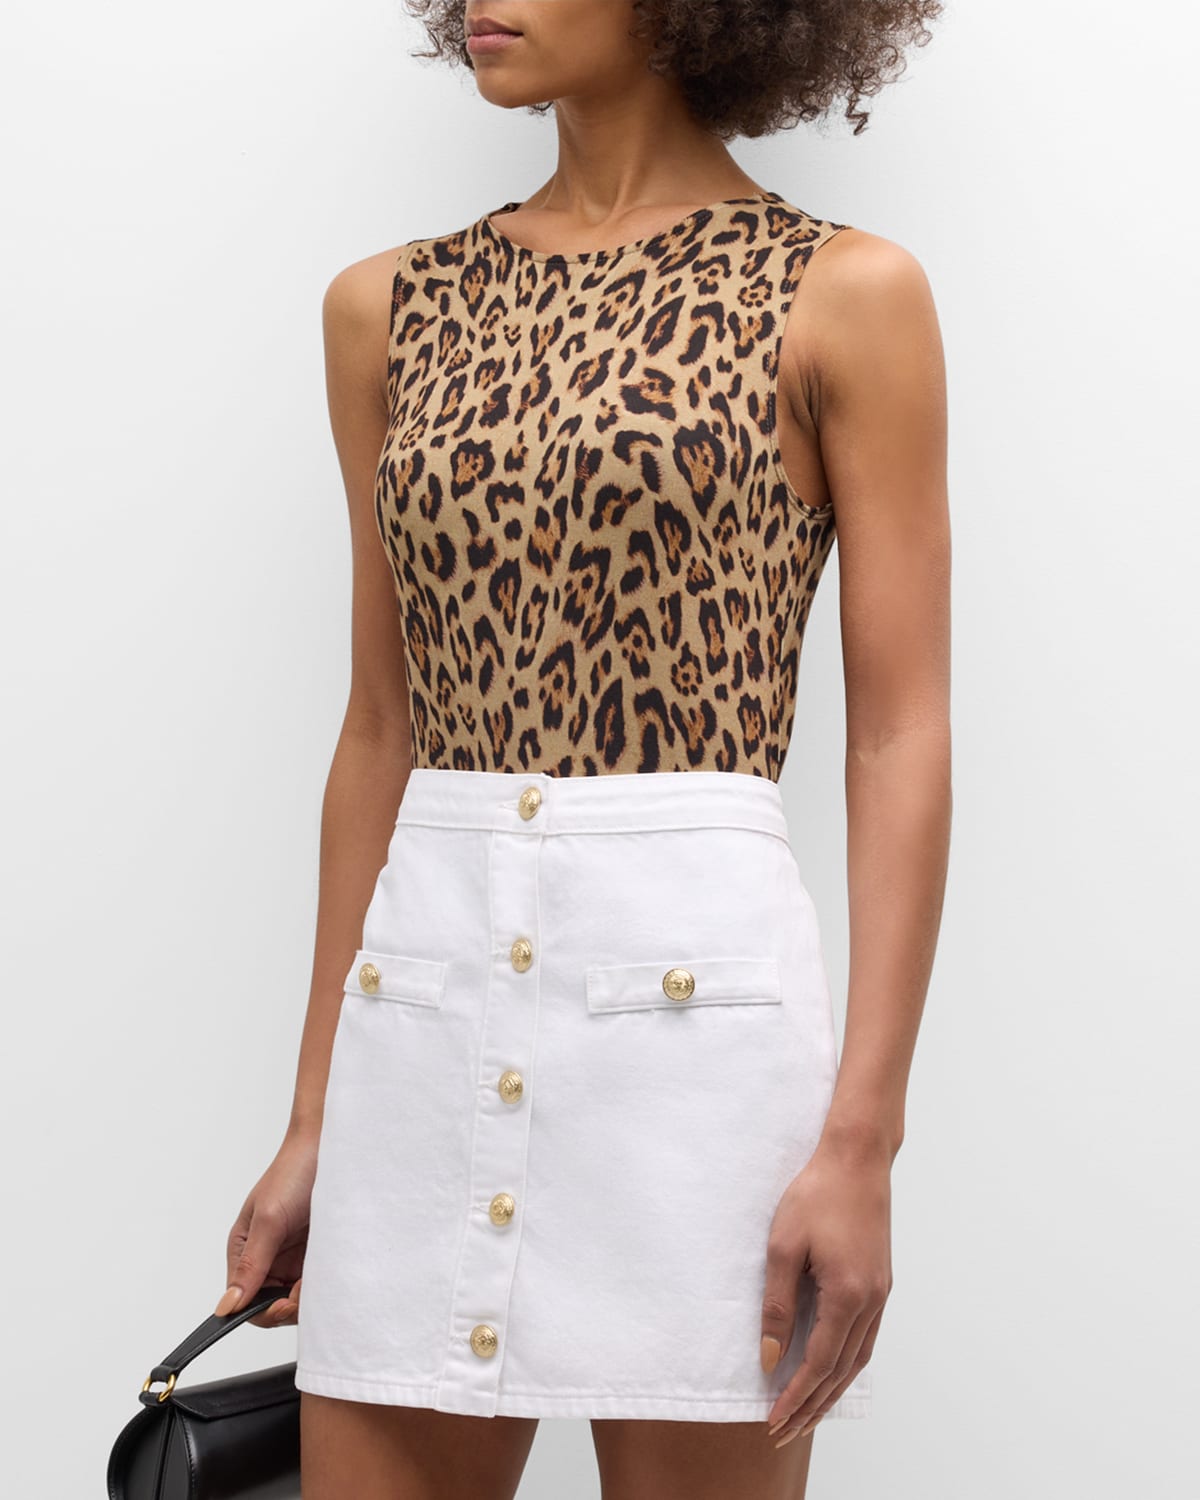 L Agence Shelly Leopard Tank Top In Animal Print